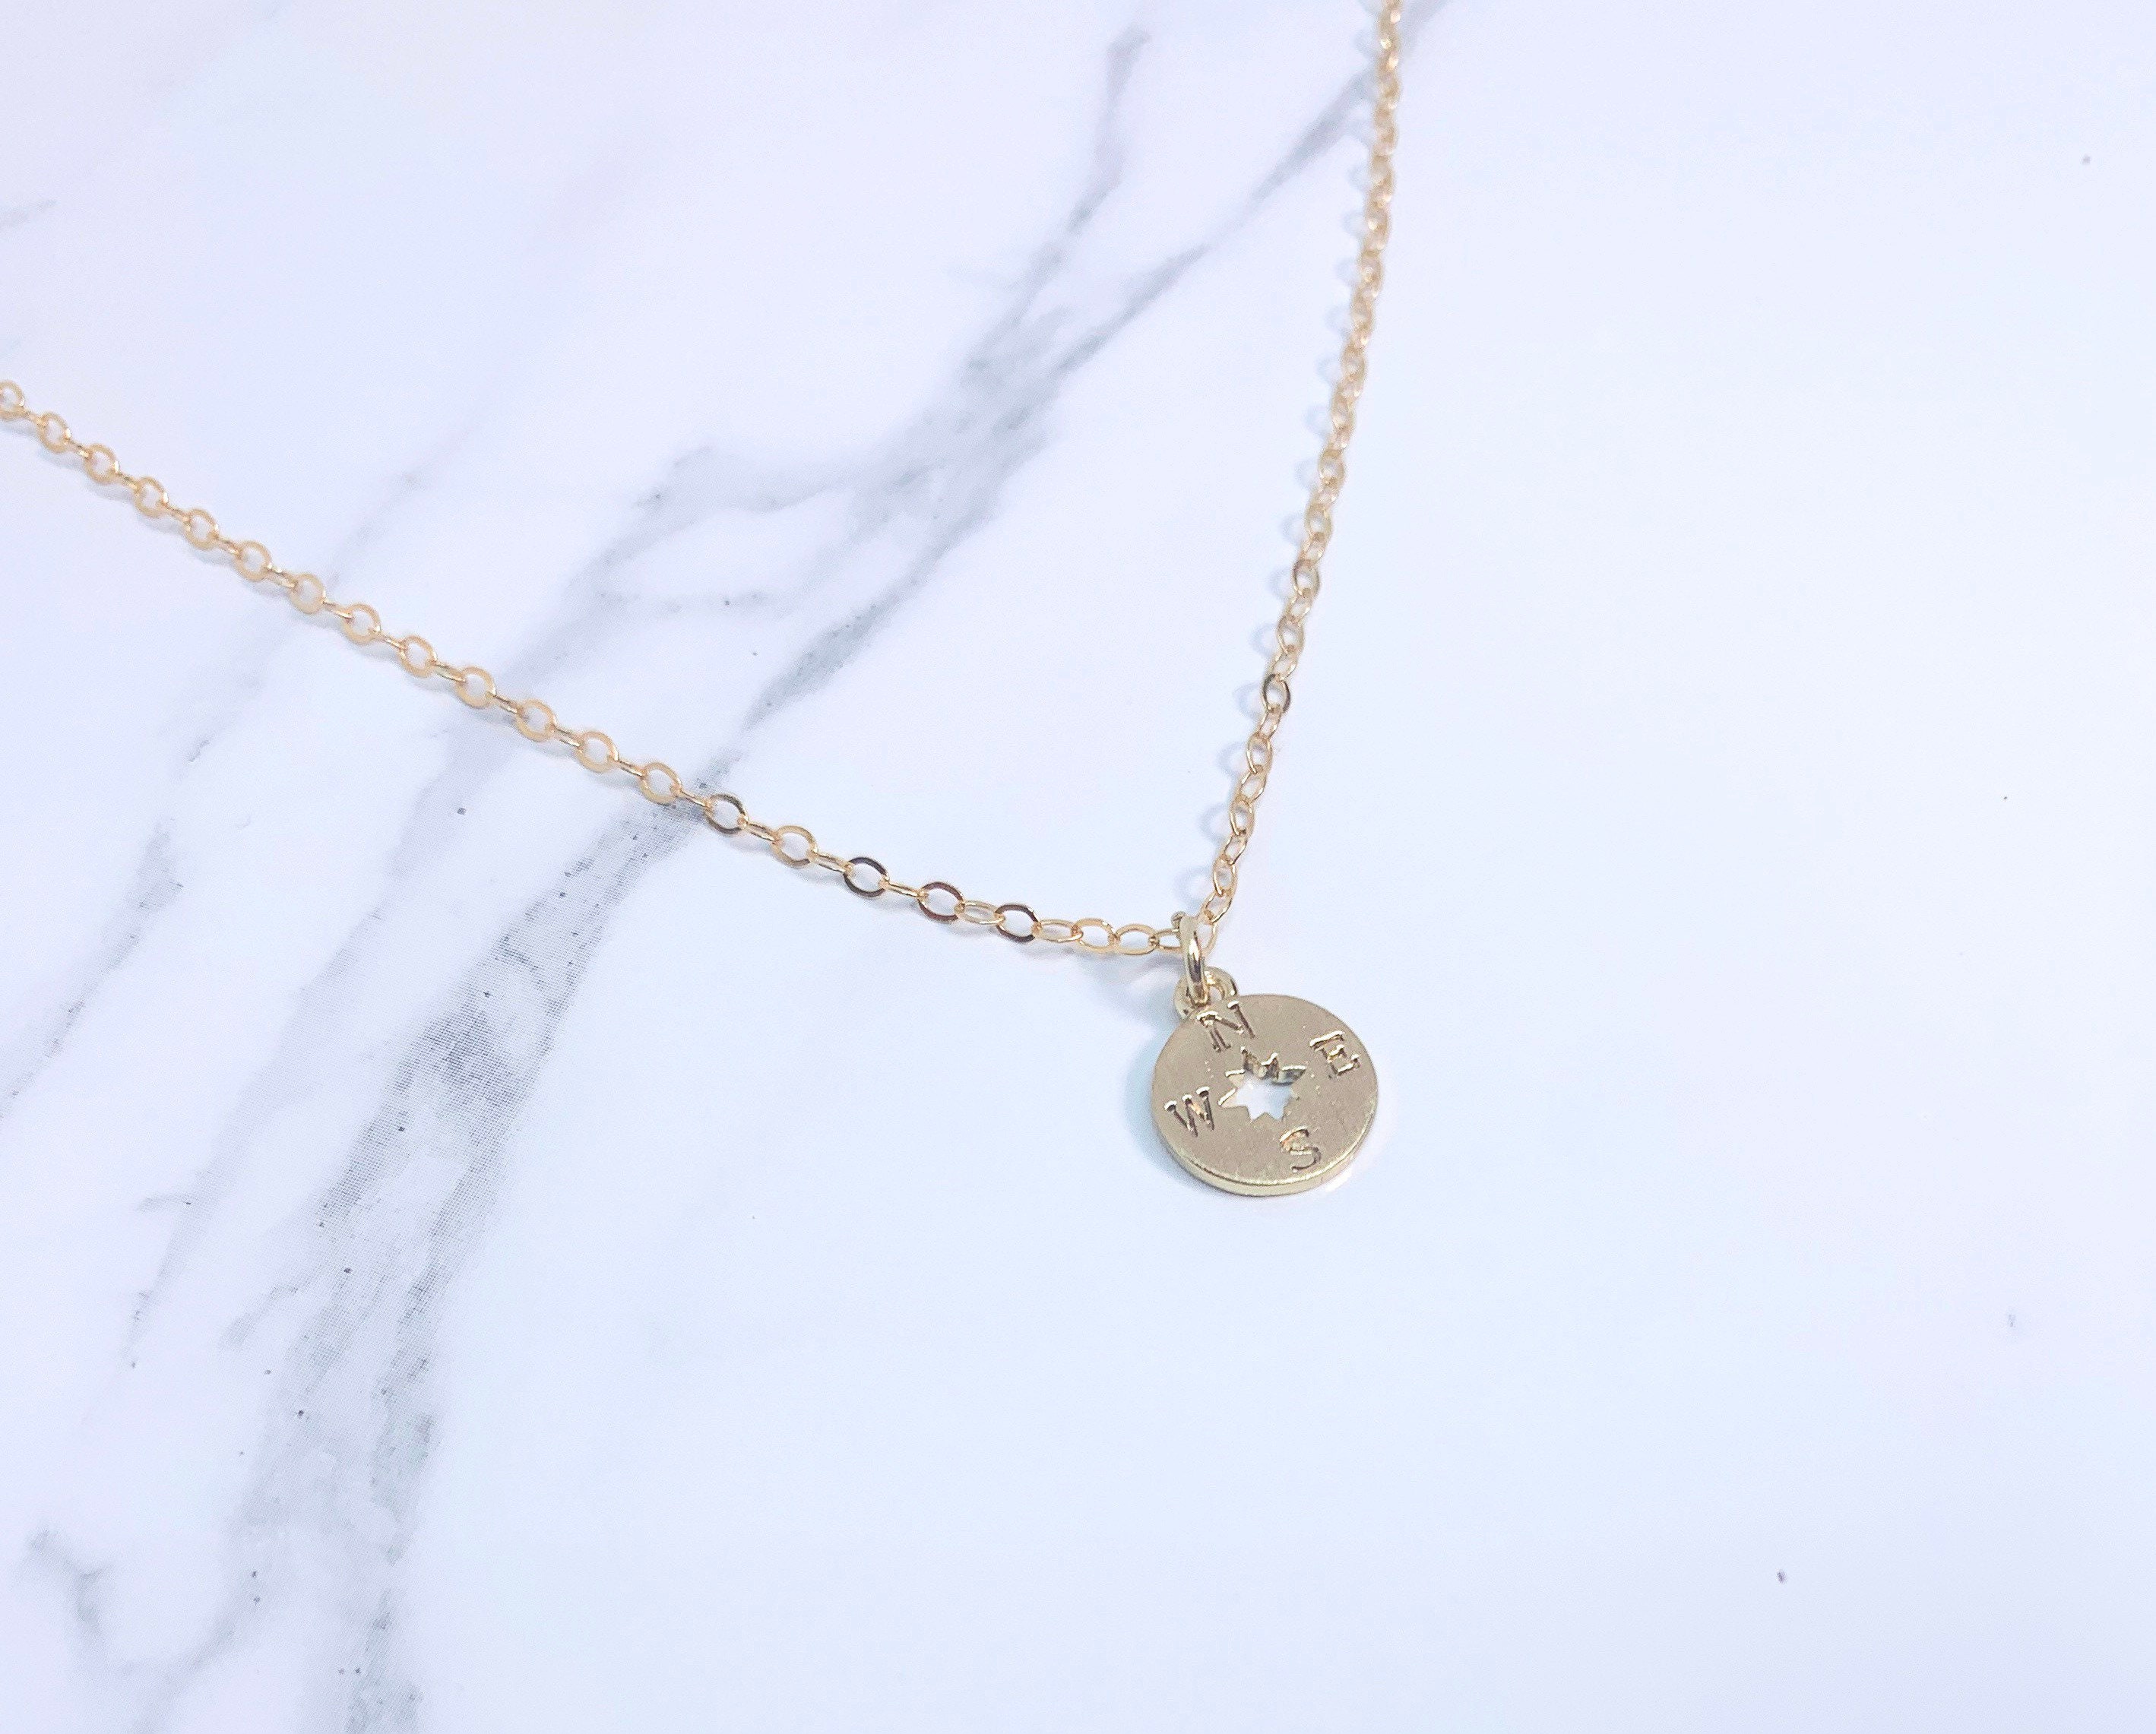 Tiny Compass Necklace Minimalist 14k Gold Filled Chain - Etsy